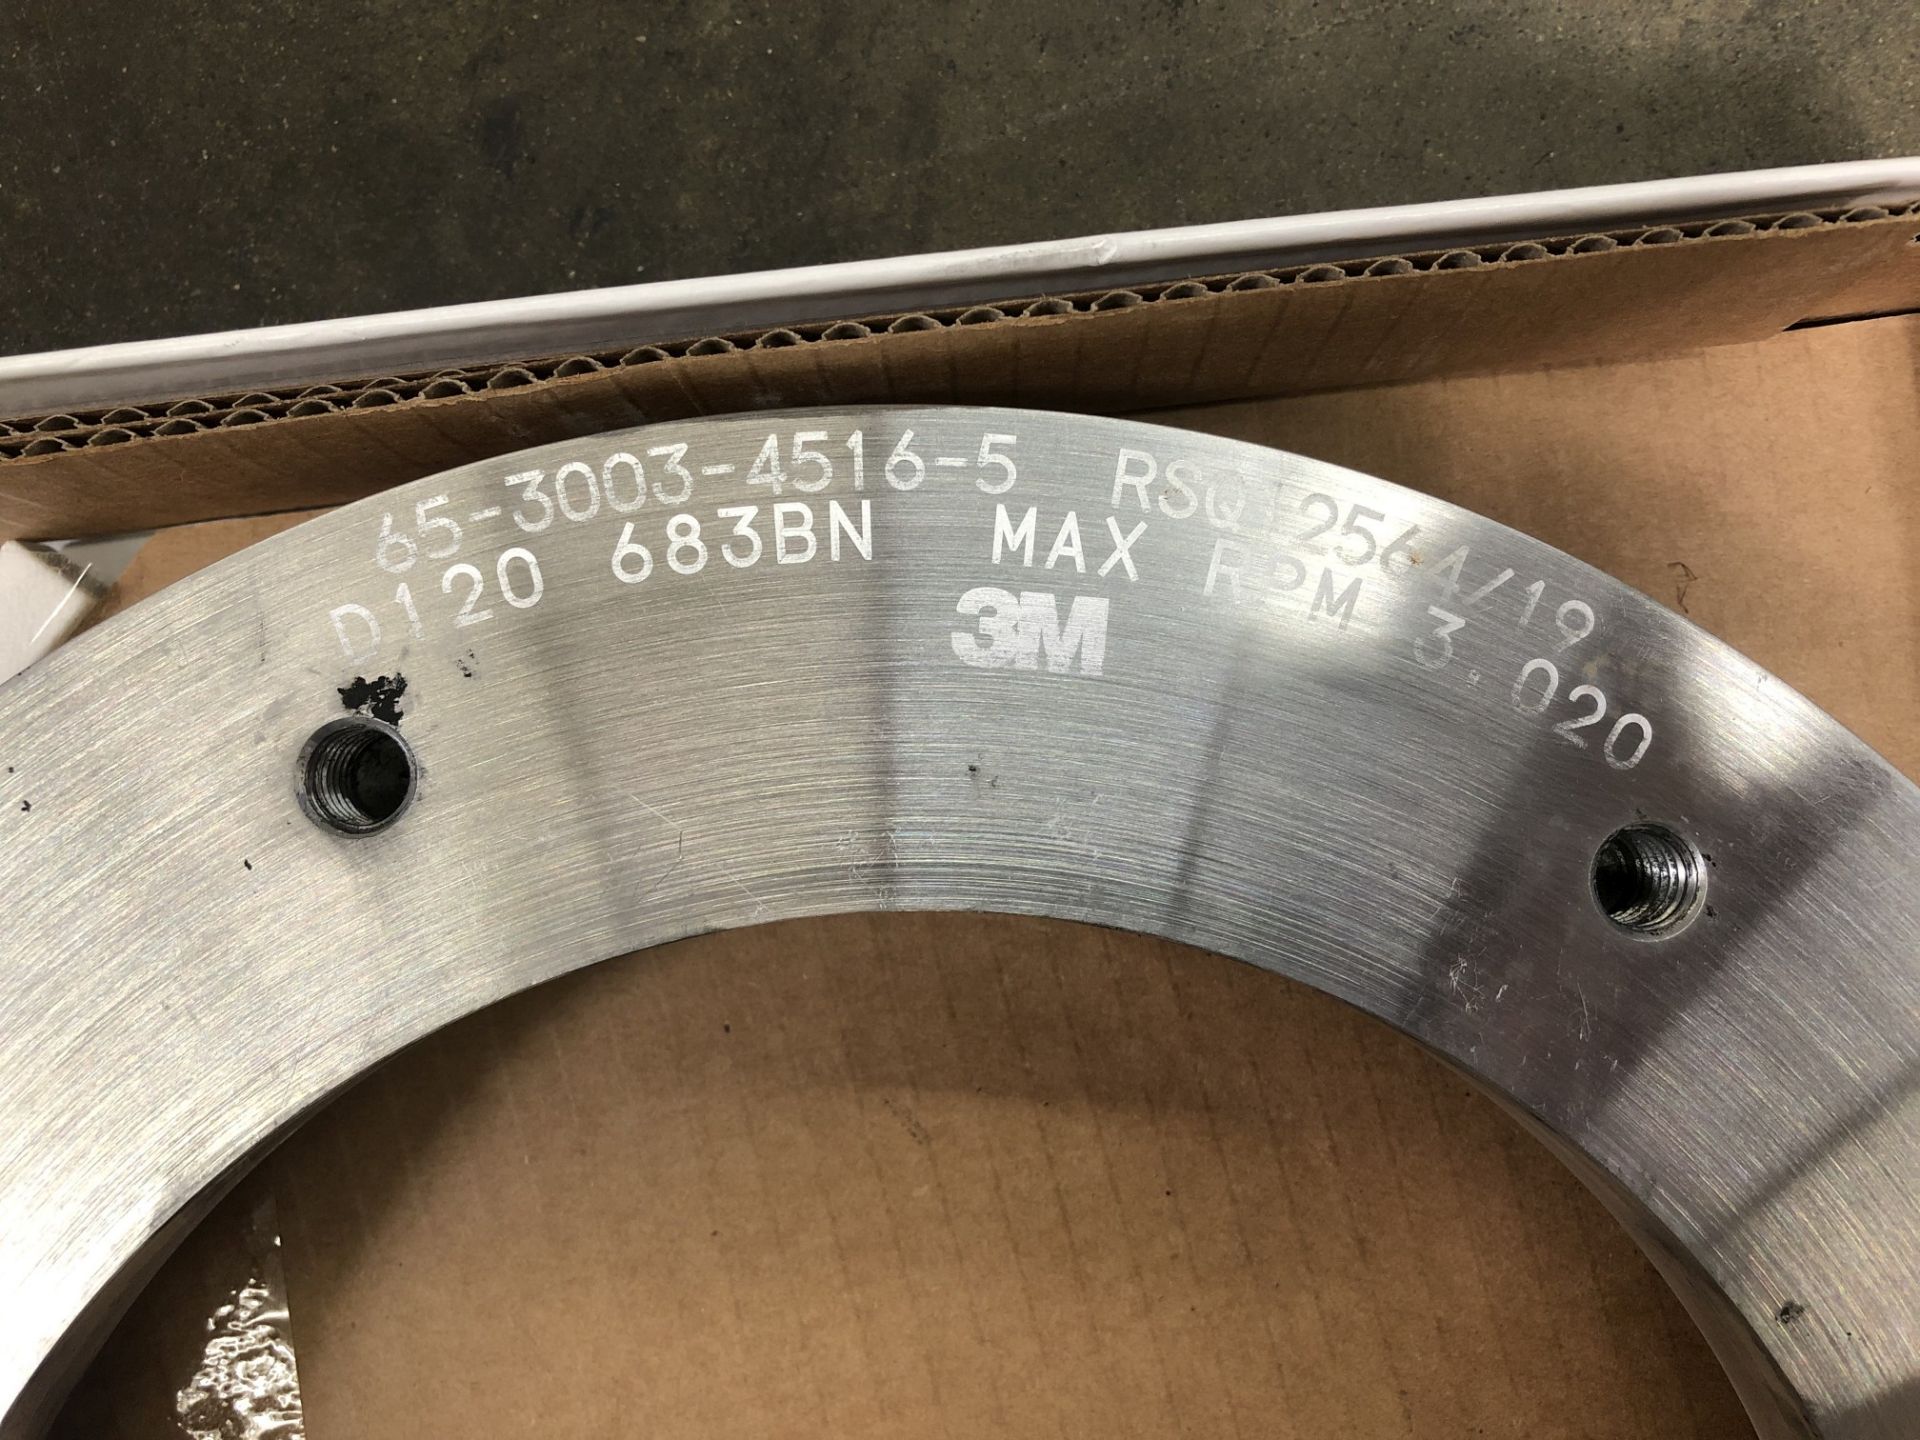 3M Grinding Wheels, Size / Spec: 2A2T, 12-1.25-.5-8, D120 683BN (New in Box) - Image 3 of 3